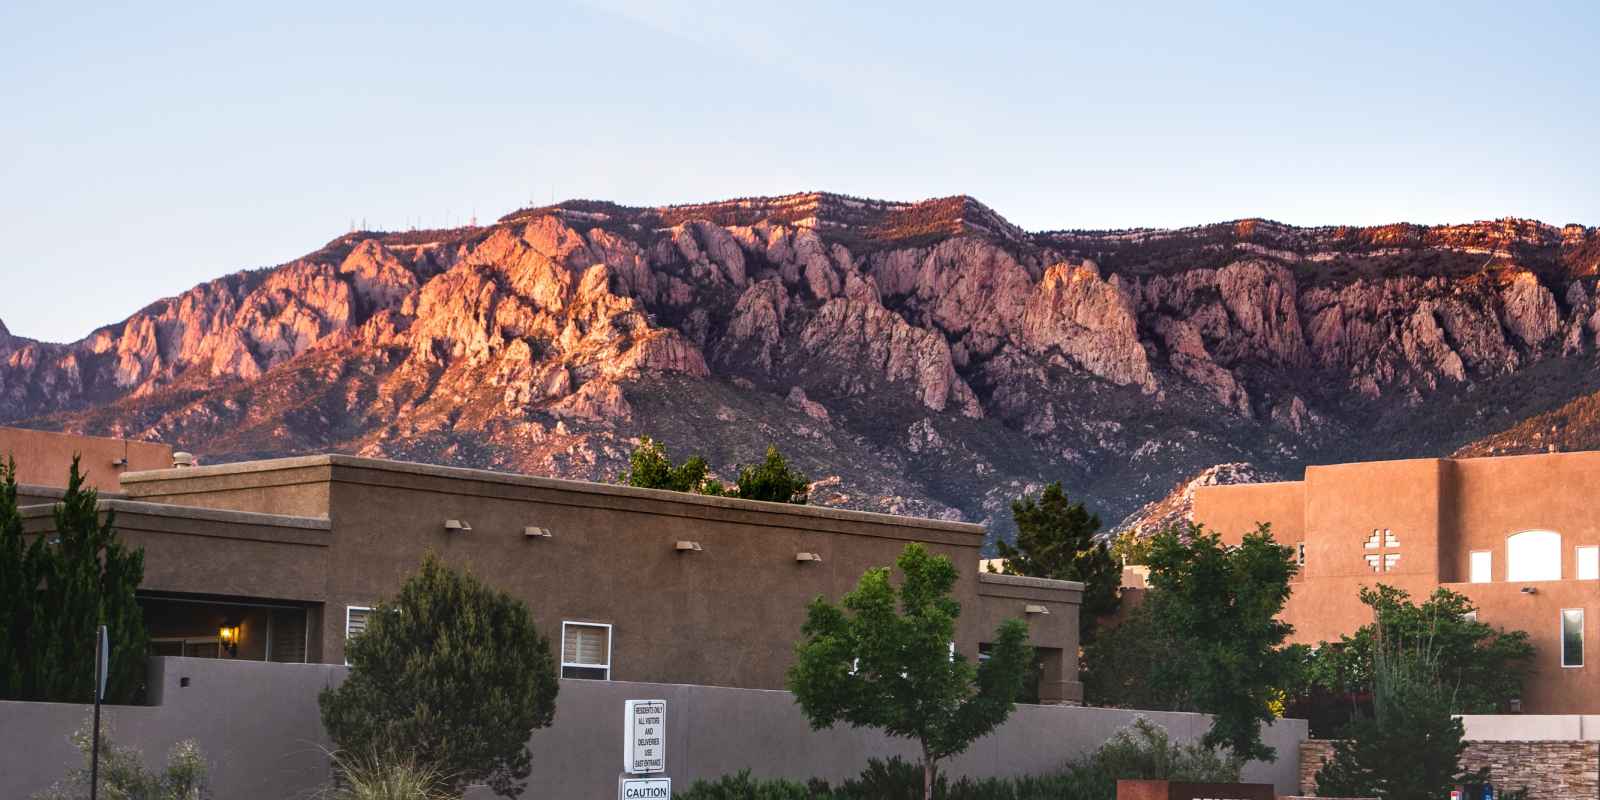 A photo of an Albuquerque neighborhood with the Sandia Mountains in the distance.